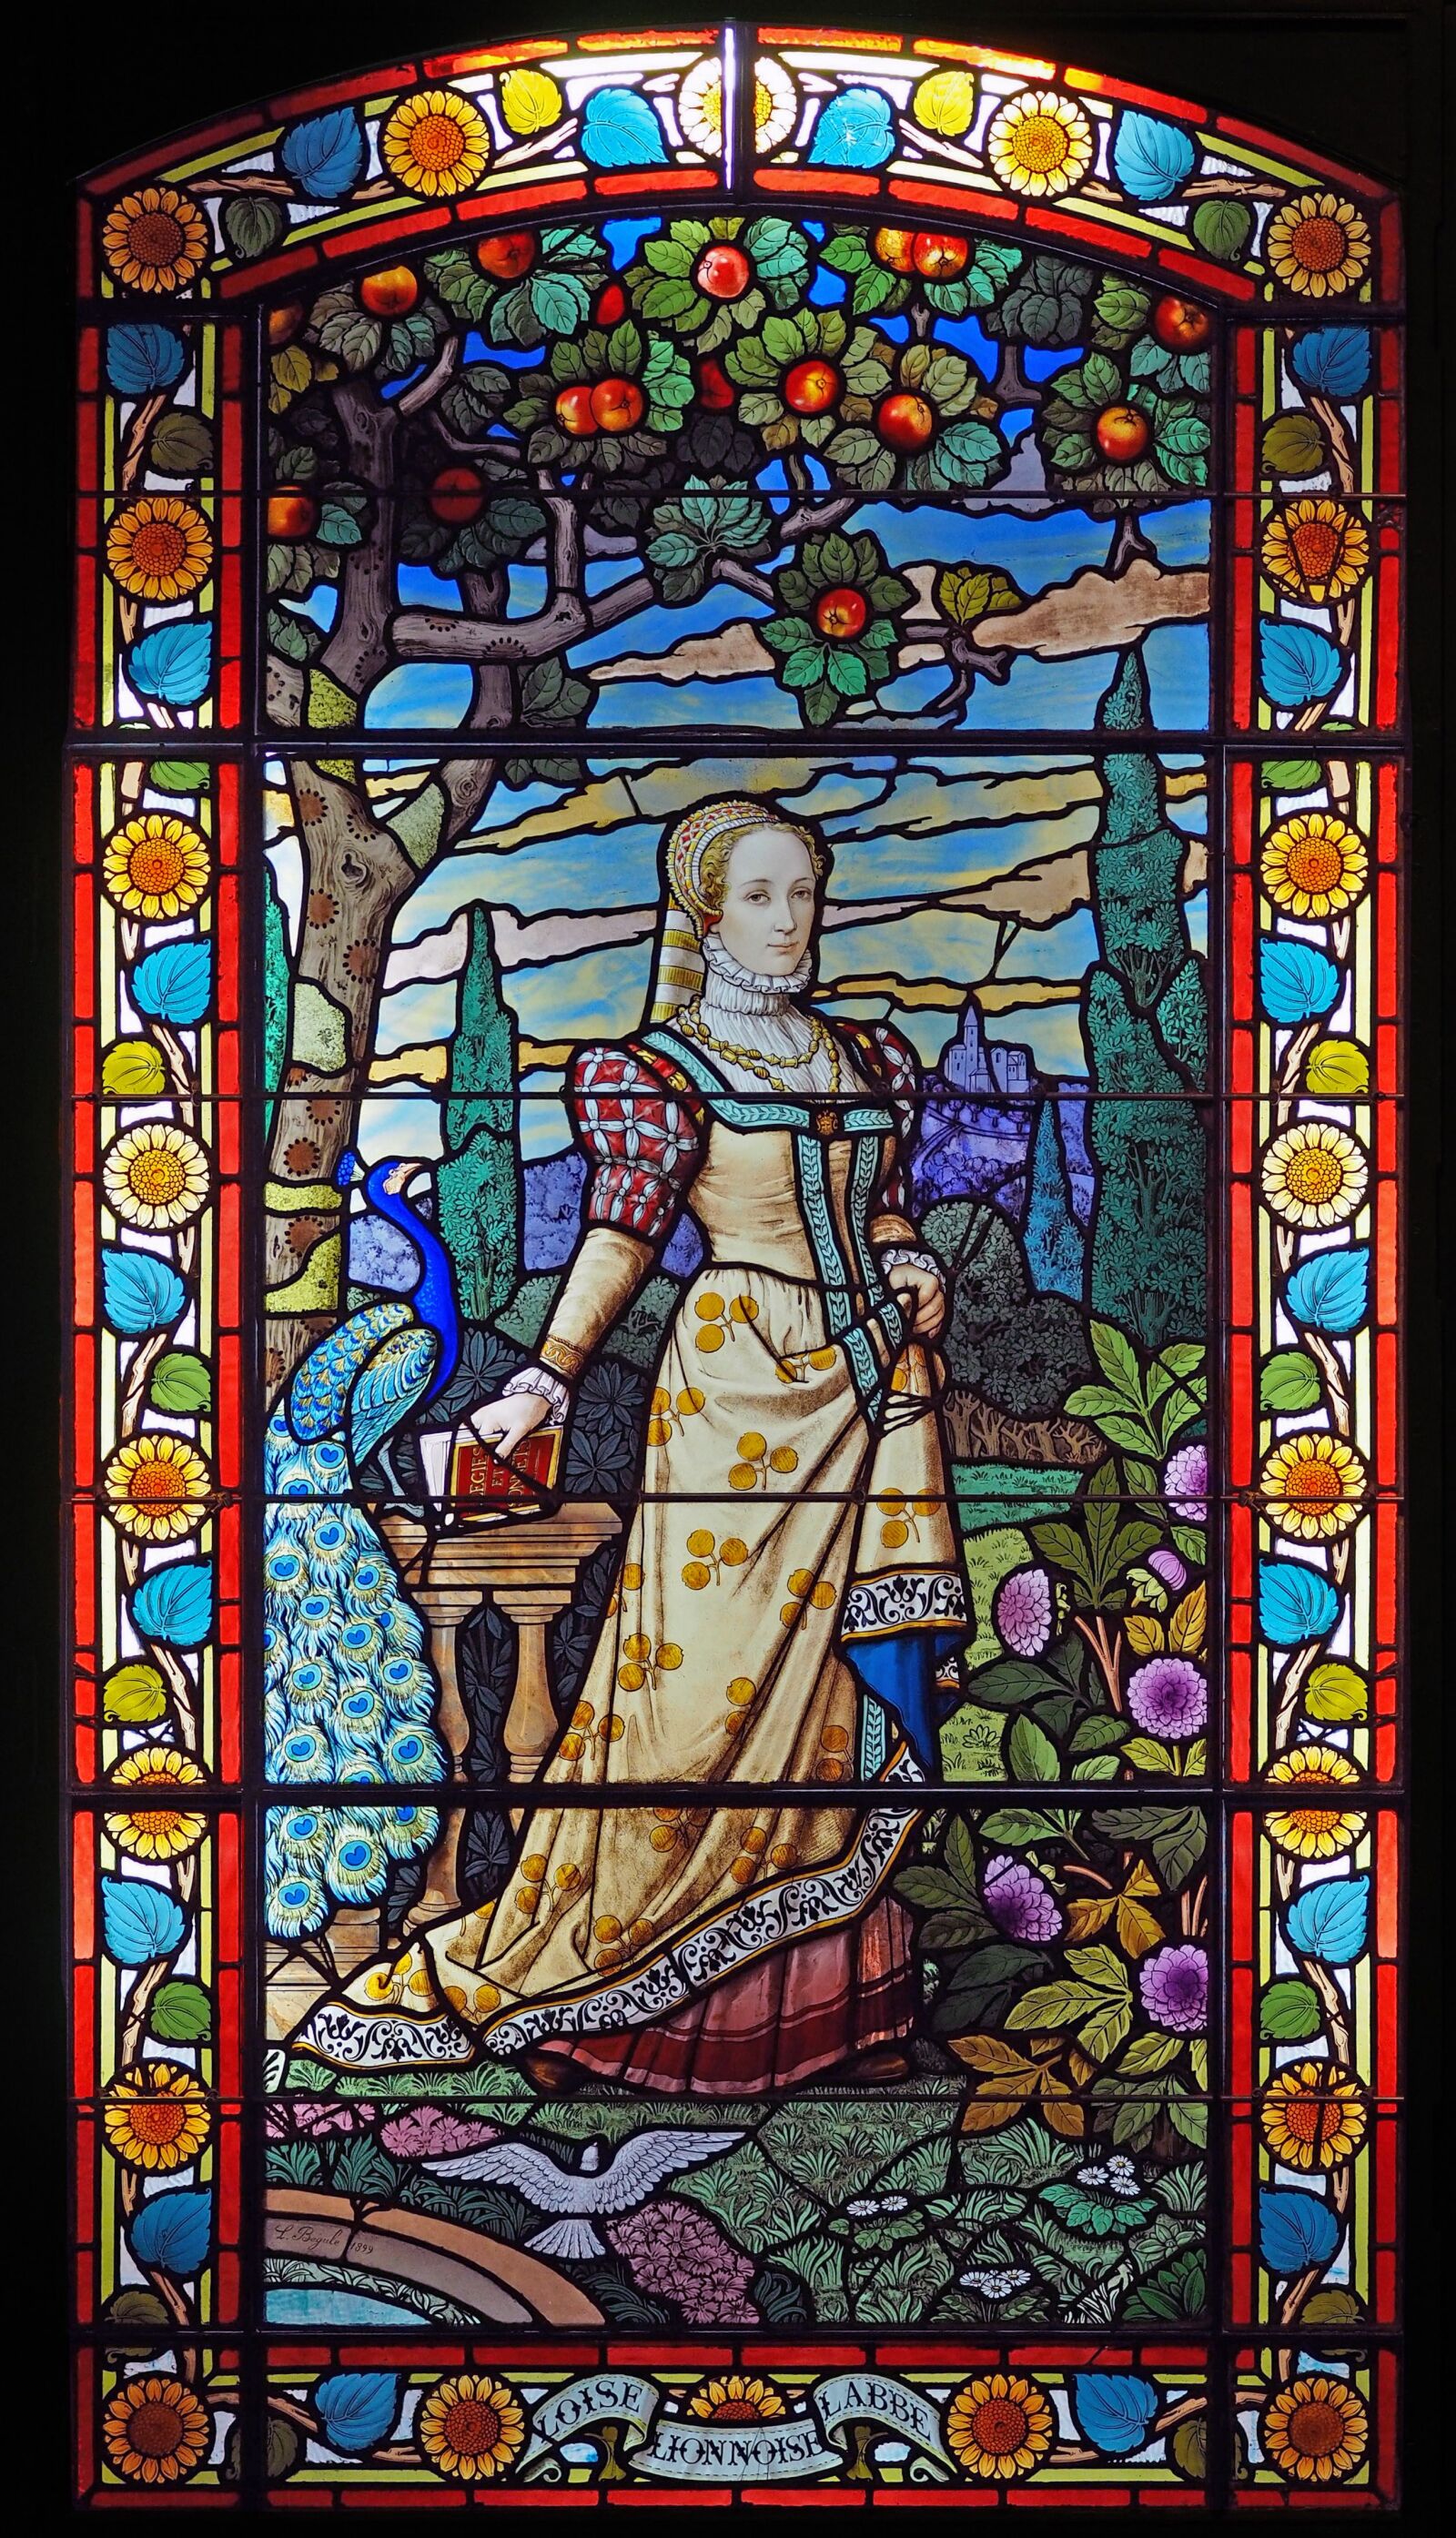 OLYMPUS 50mm Lens sample photo. Stained glass windows, museum photography